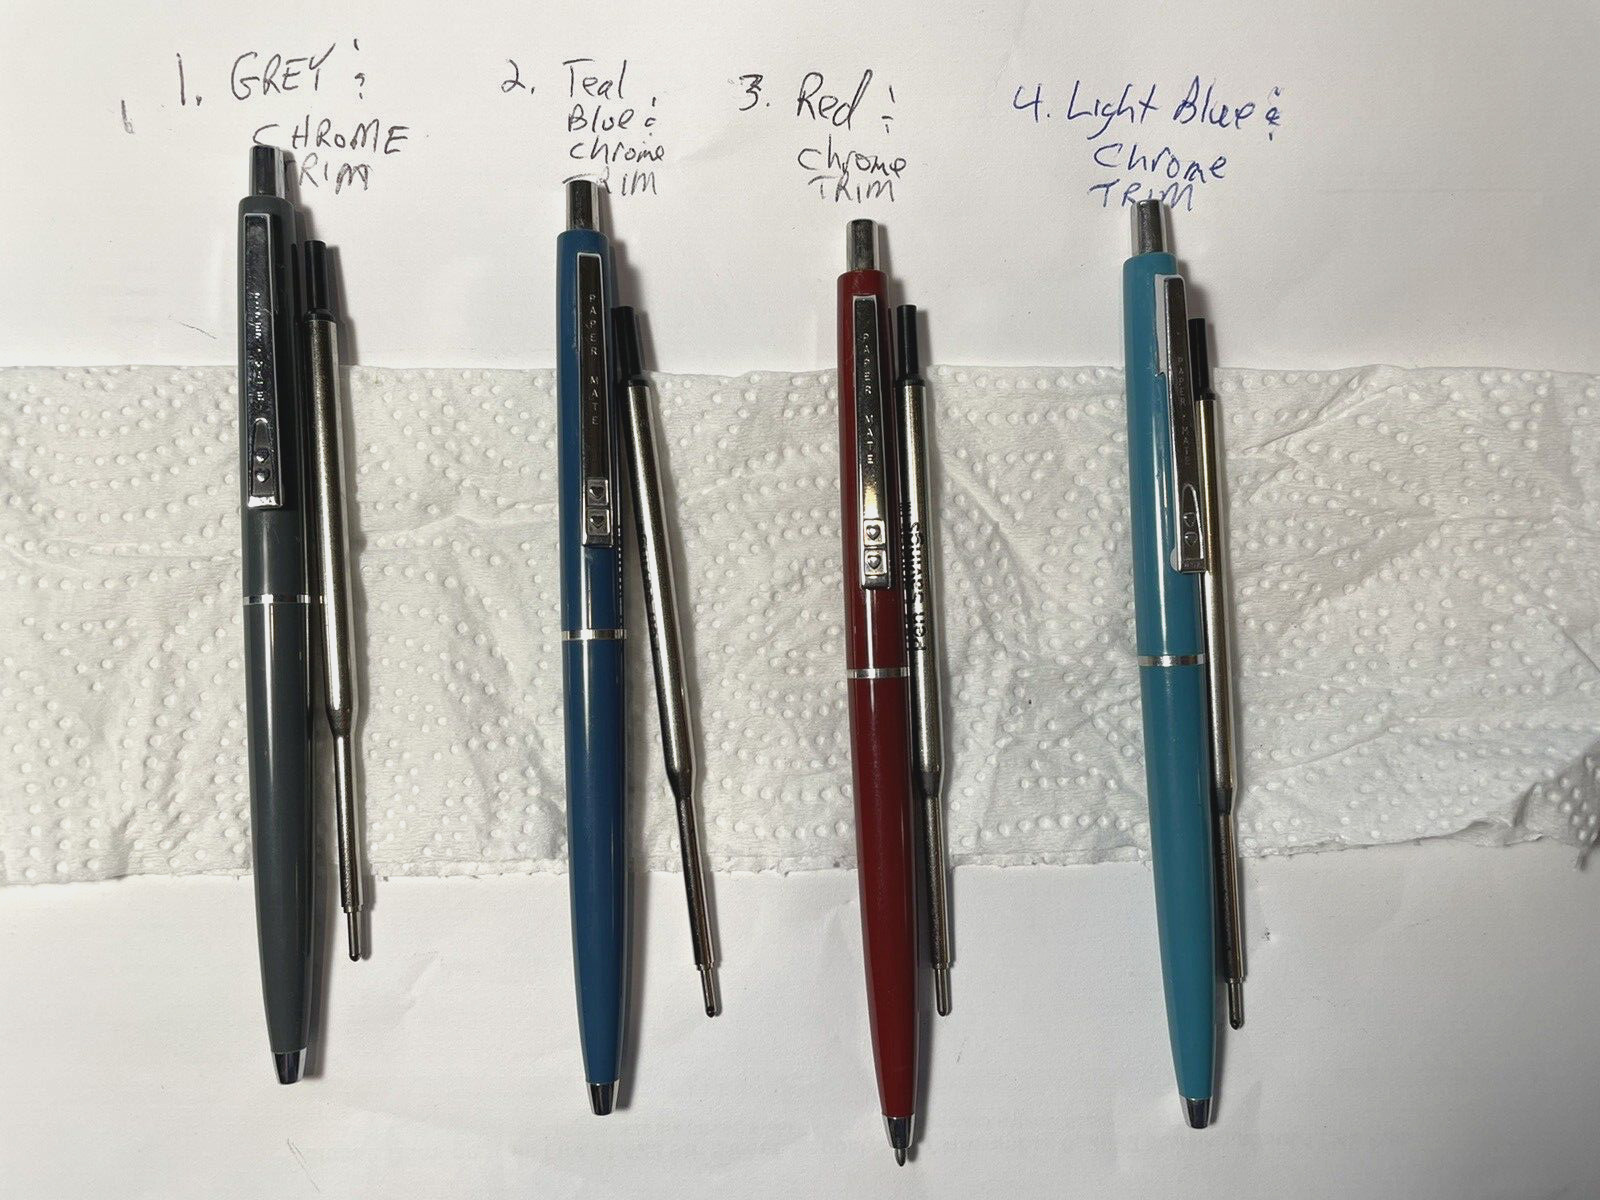 4 Vintage Paper Mate 2 Hearts Ballpoint Pens USA Mexico - Priced Separately